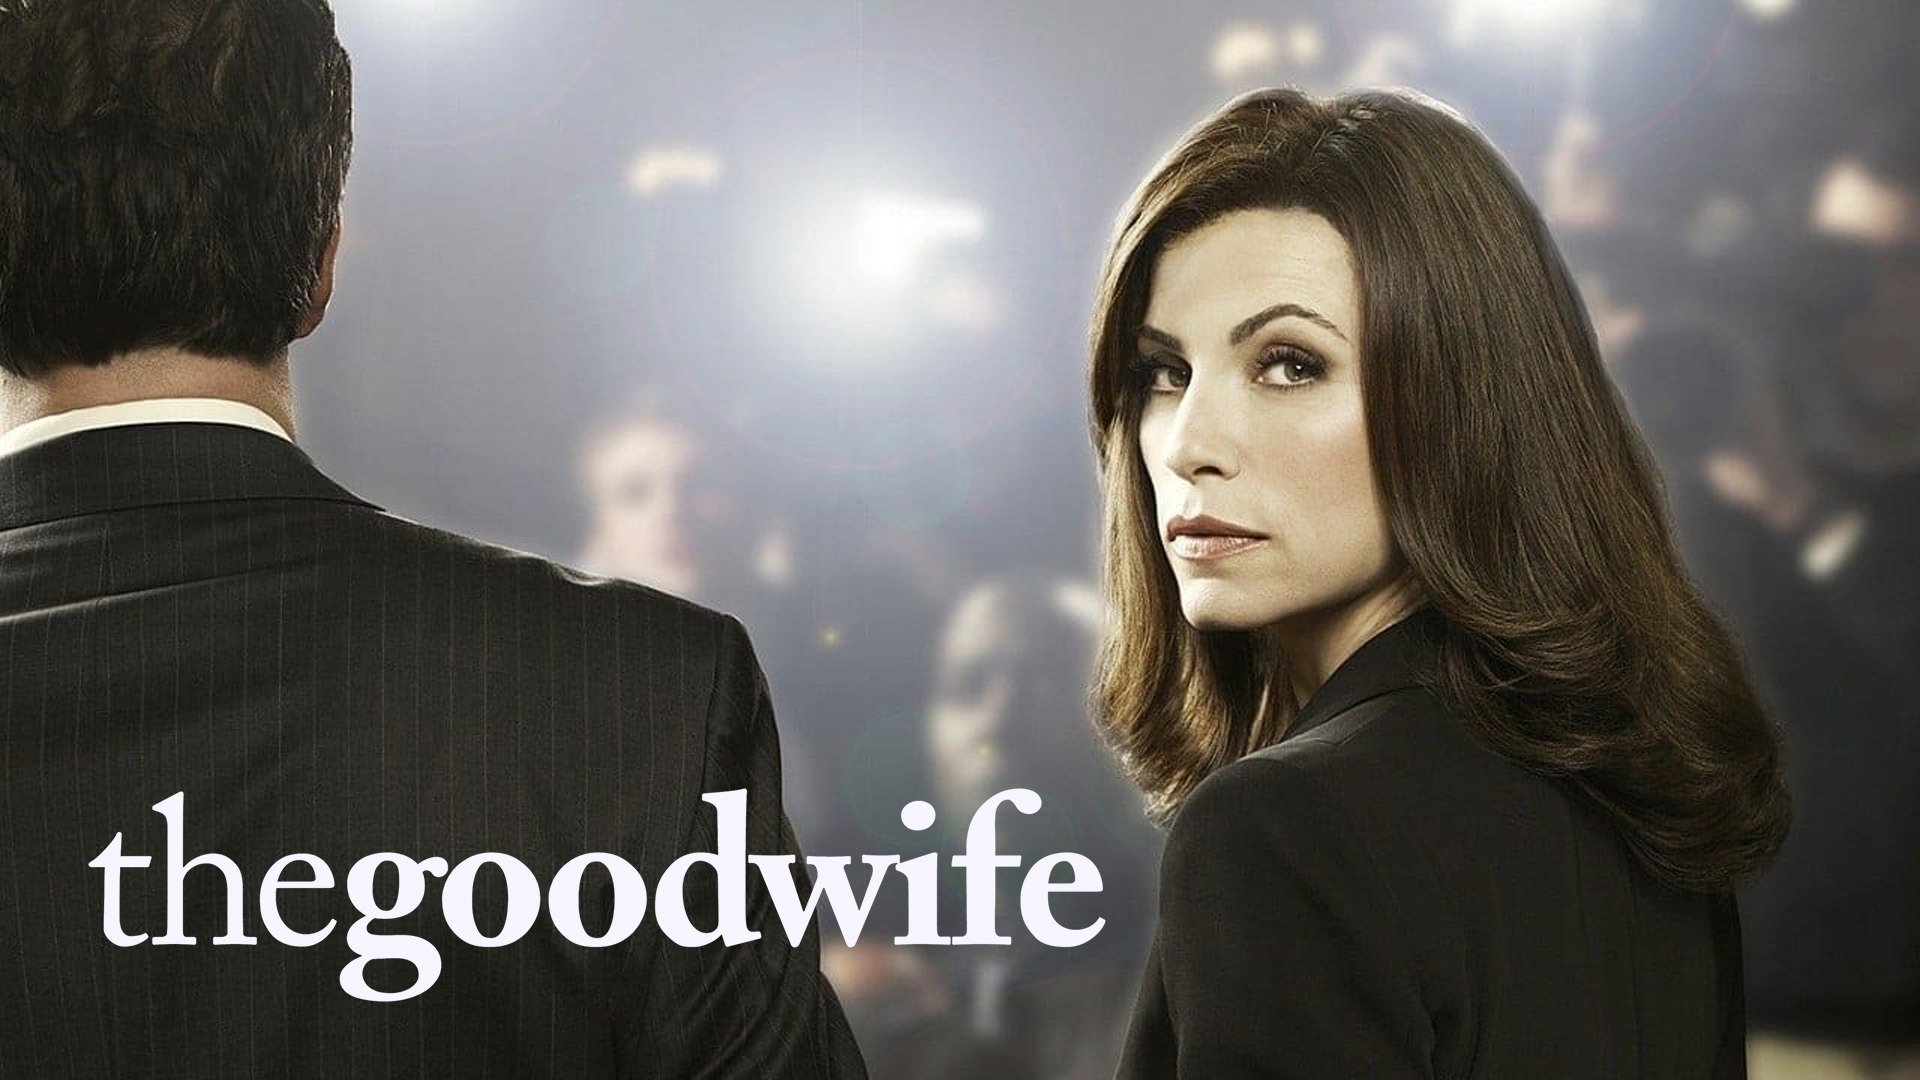 the good wife threesome cast